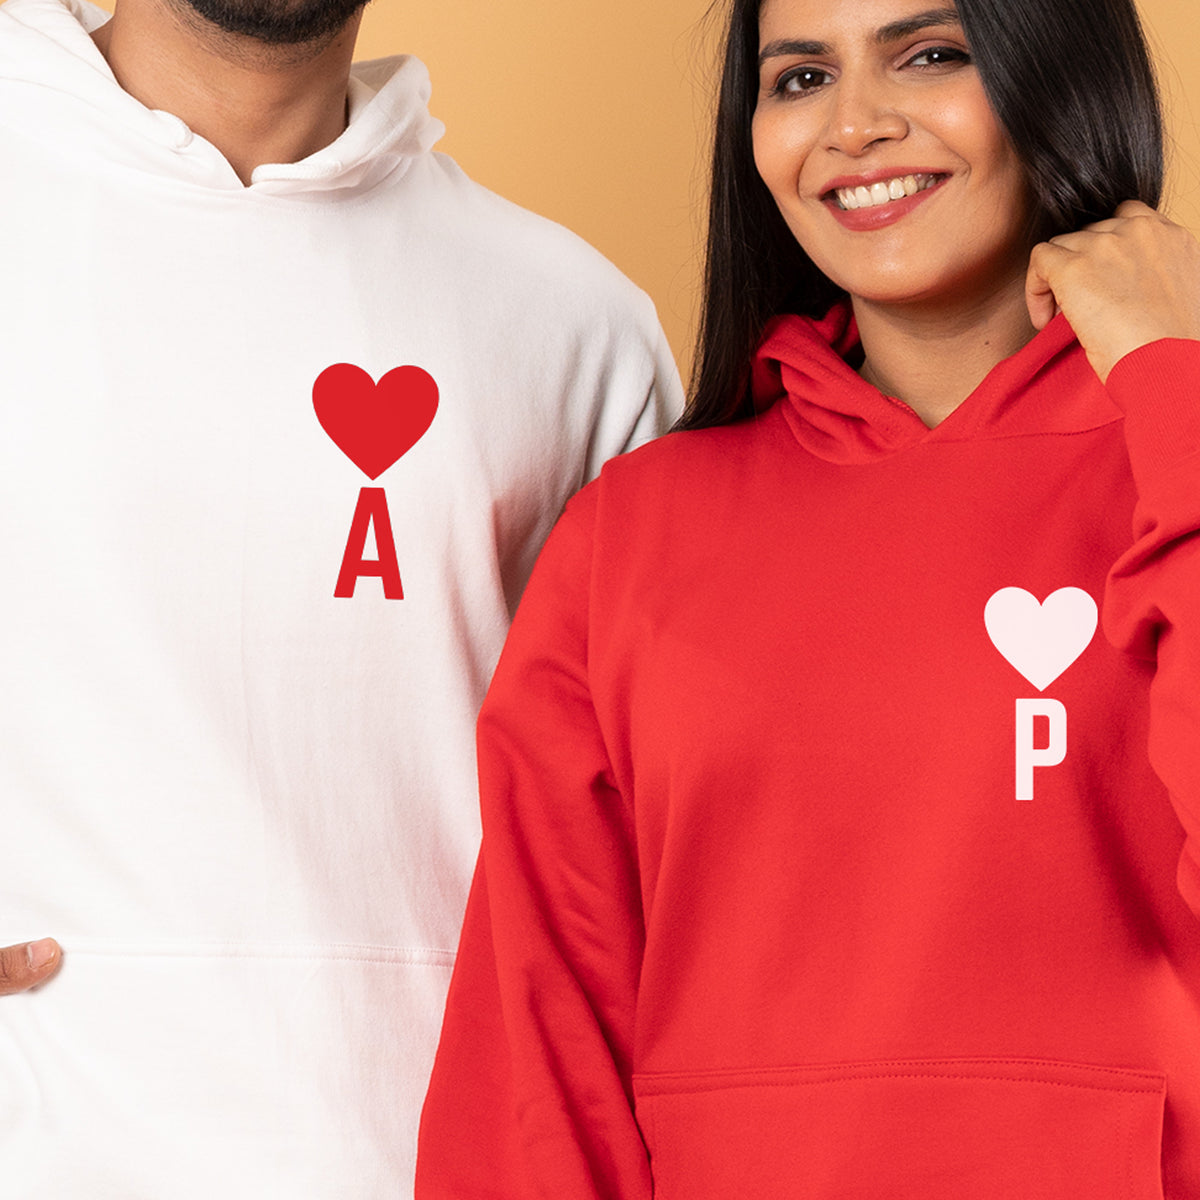 Rebel Lover, Matching Red Hoodies For Couples